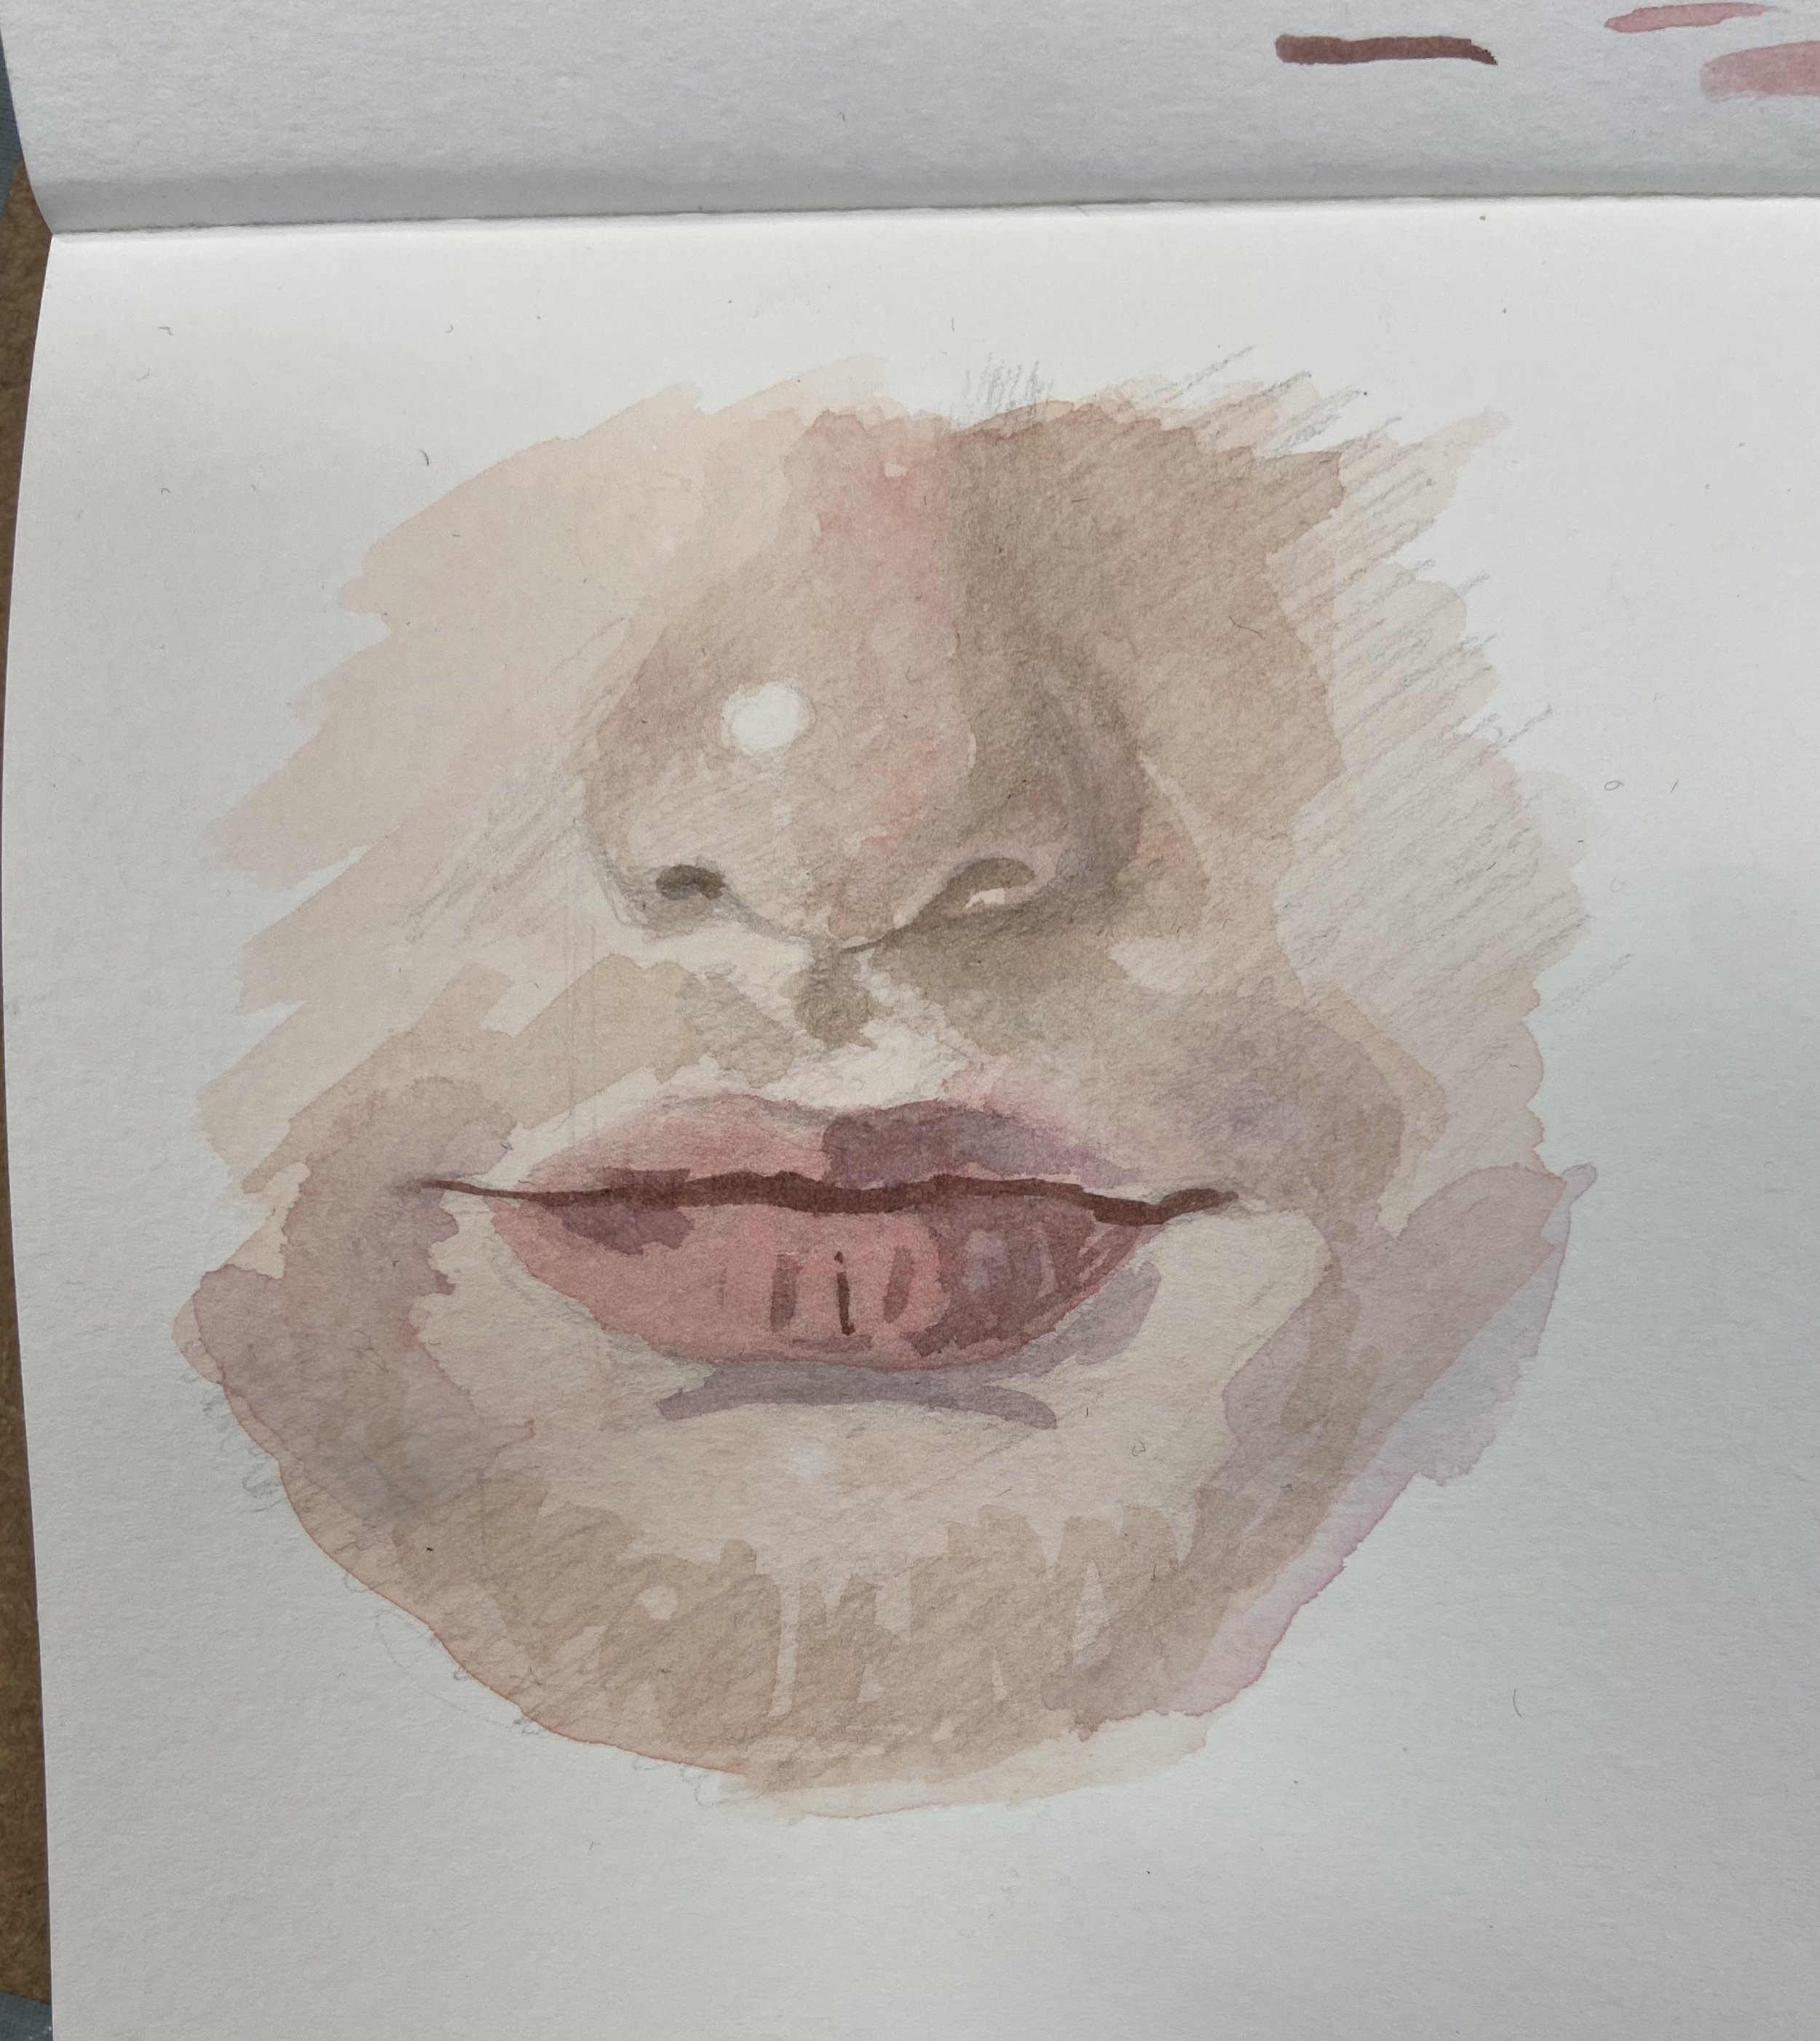  Julie’s demo - very small - graphite and watercolour 